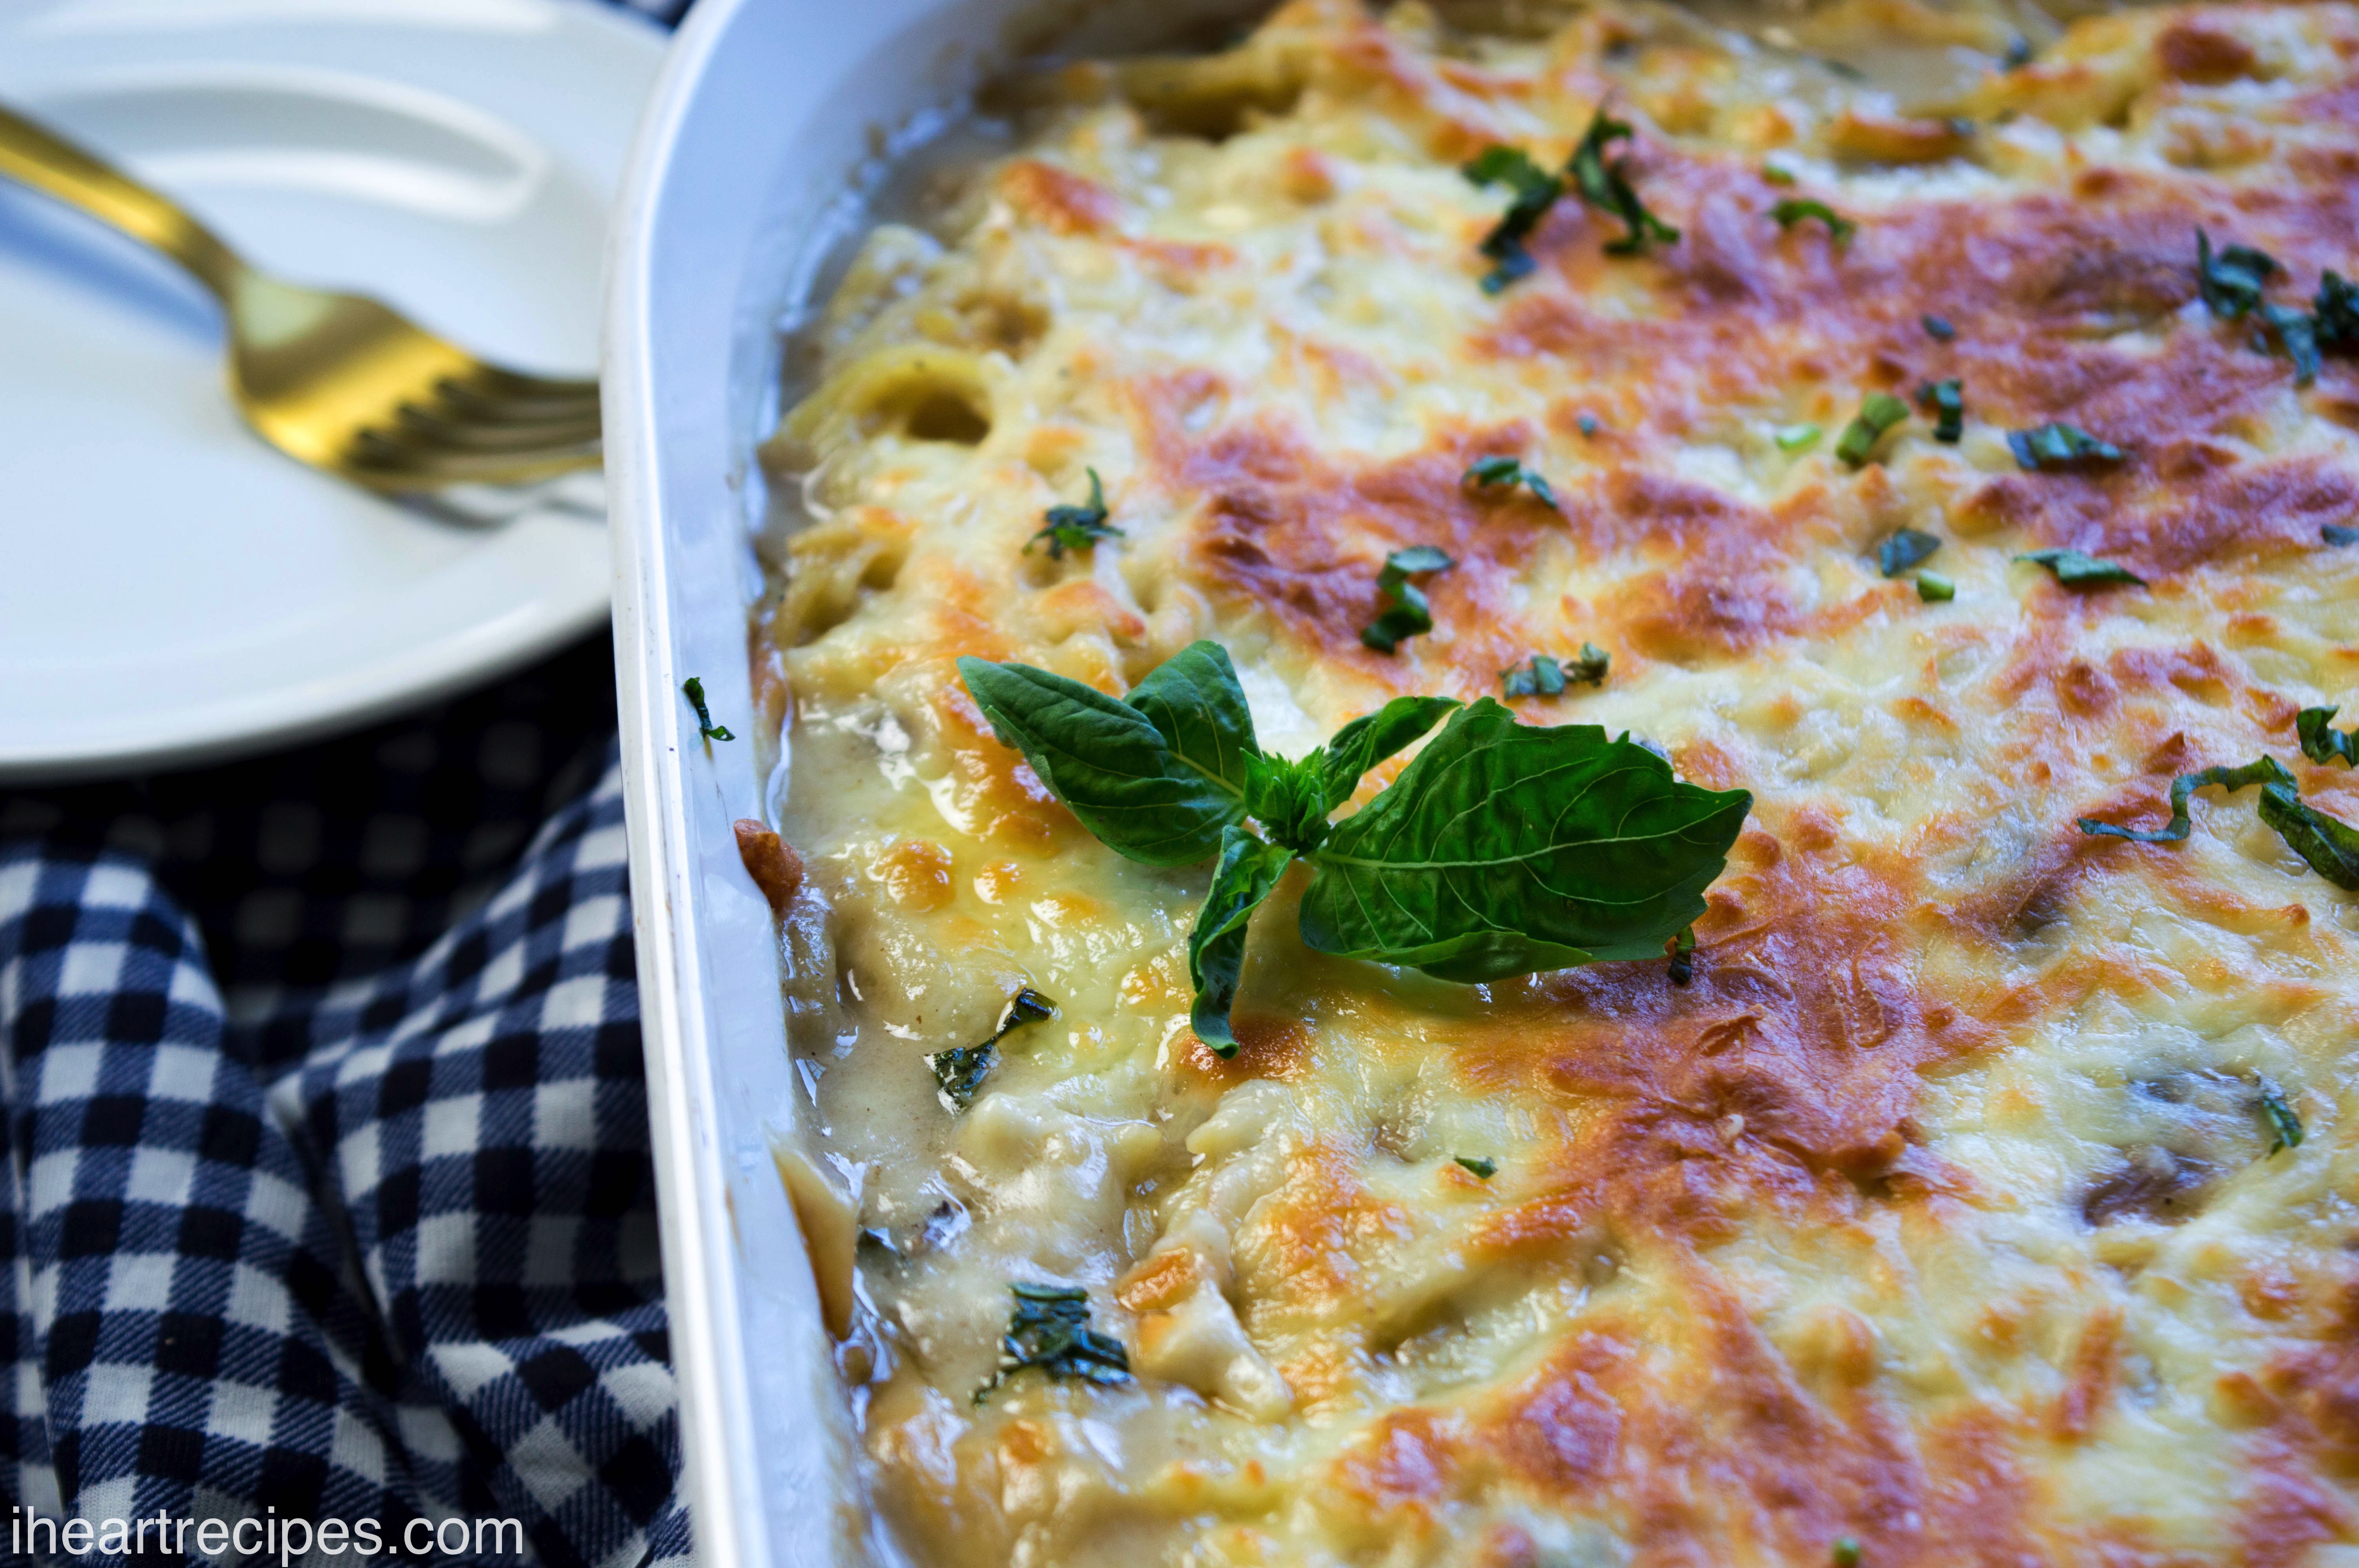 This creamy chicken Tetrazzini is garnished with fragrant basil. Enjoy this delicious dish with your family tonight!